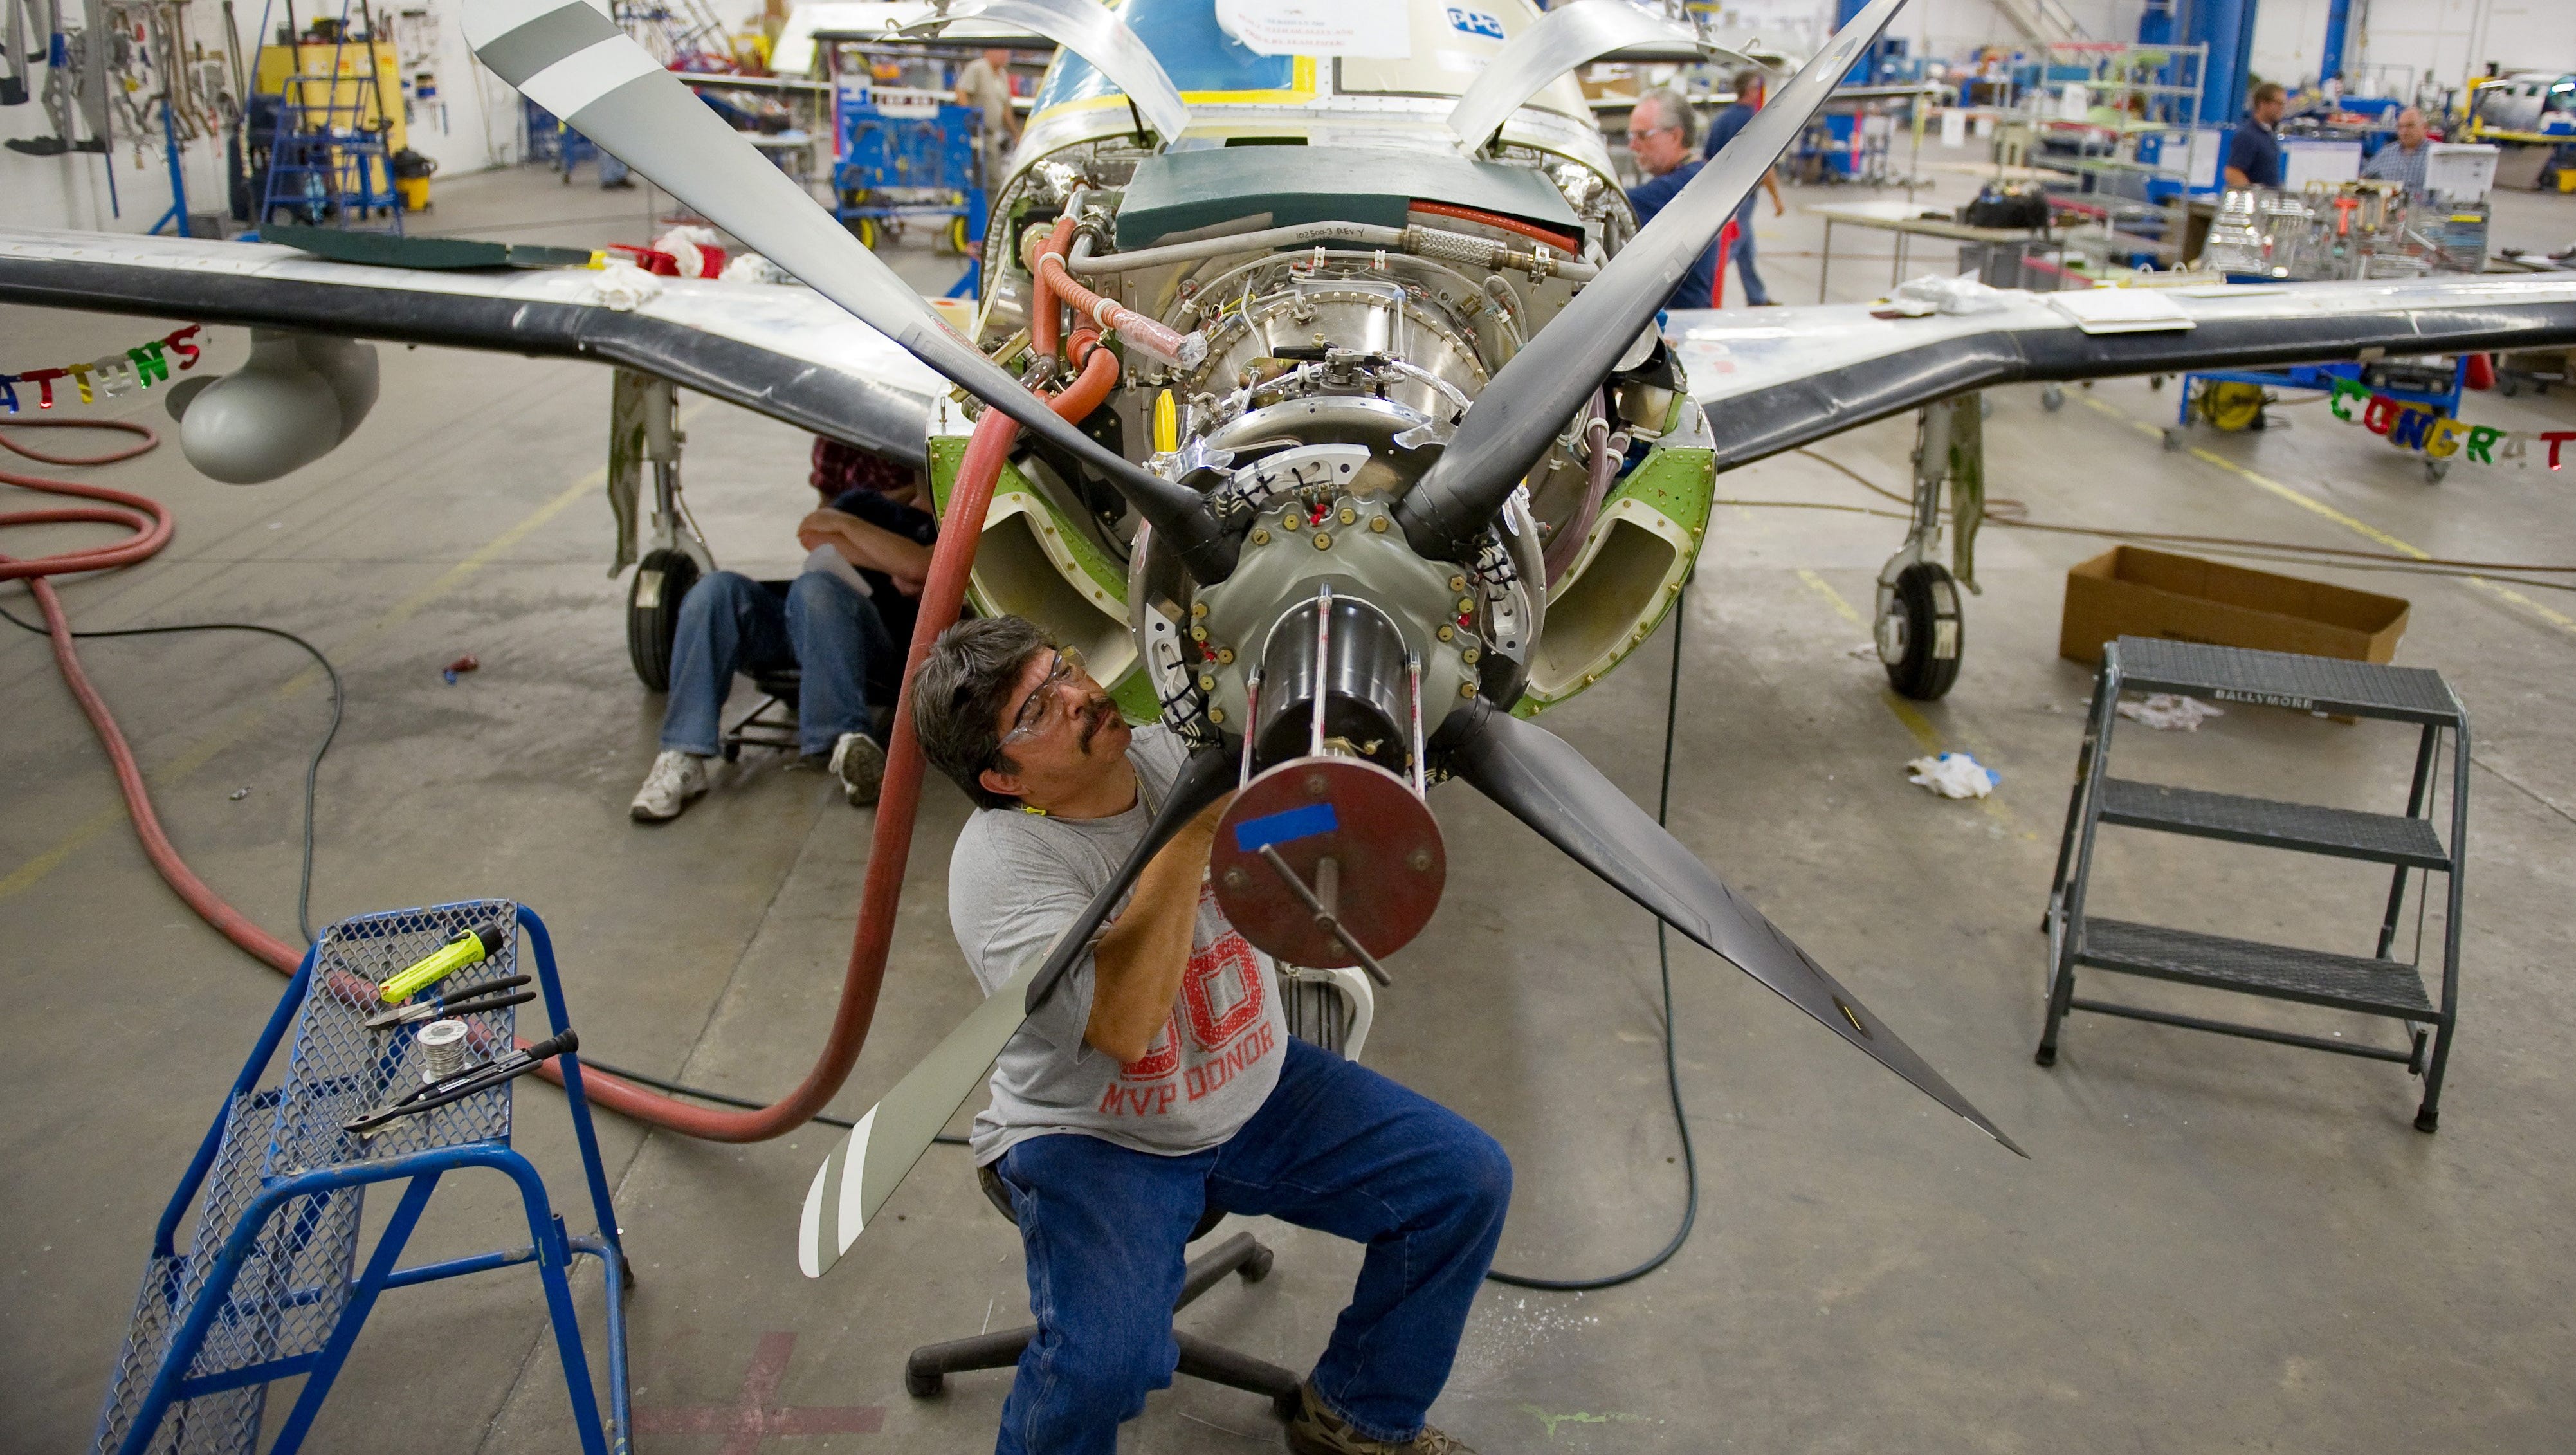 Piper Aircraft And Irsc Aim To Train More Highly Skilled Aviation Workers